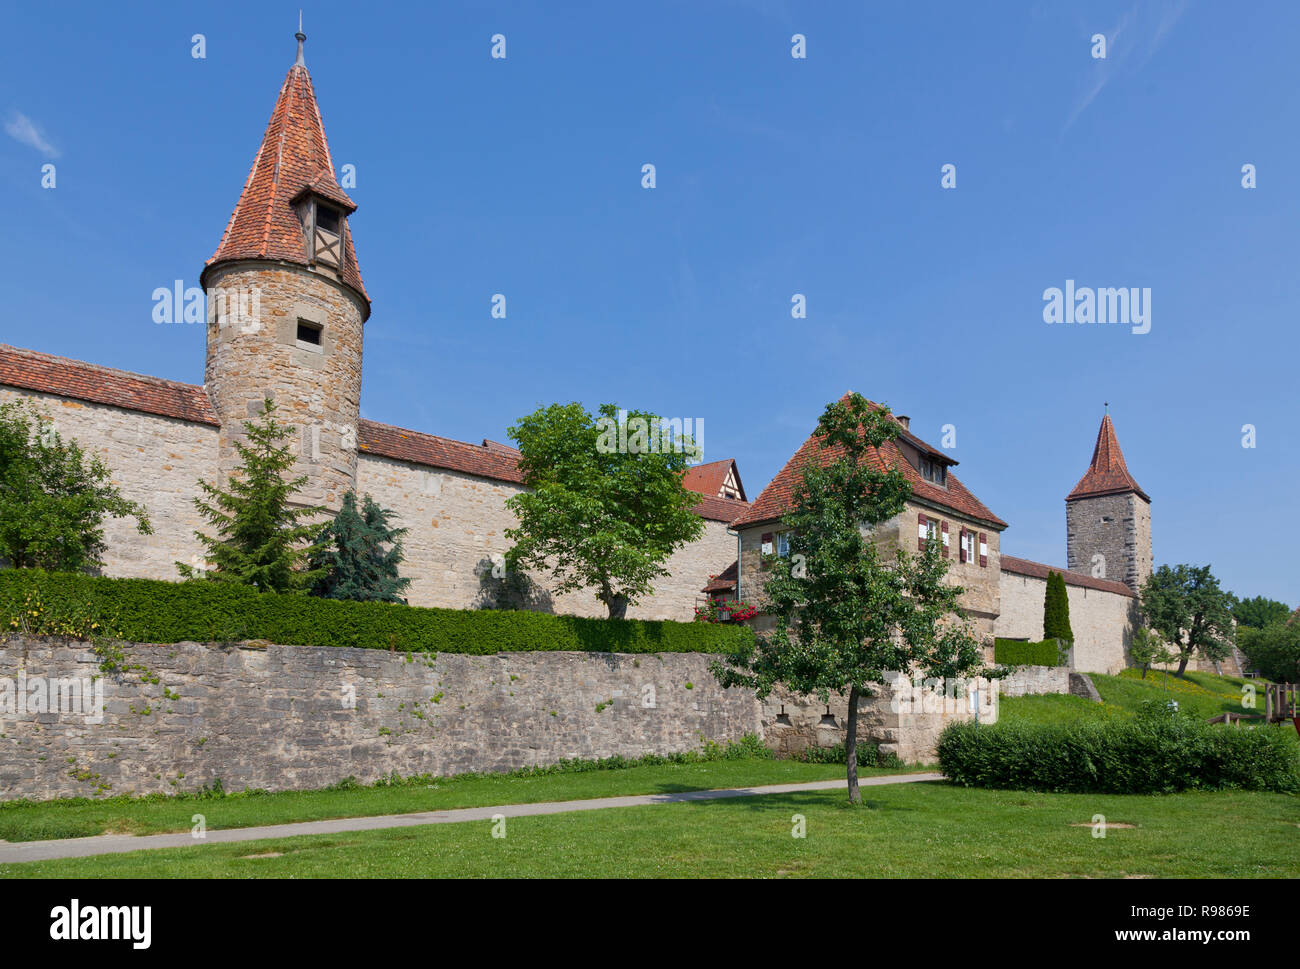 Red tiled towers in the western part of the medieval city ring wall around Rothenburg ob der Tauber, Franconia, Bavaria, Germany. Stock Photo